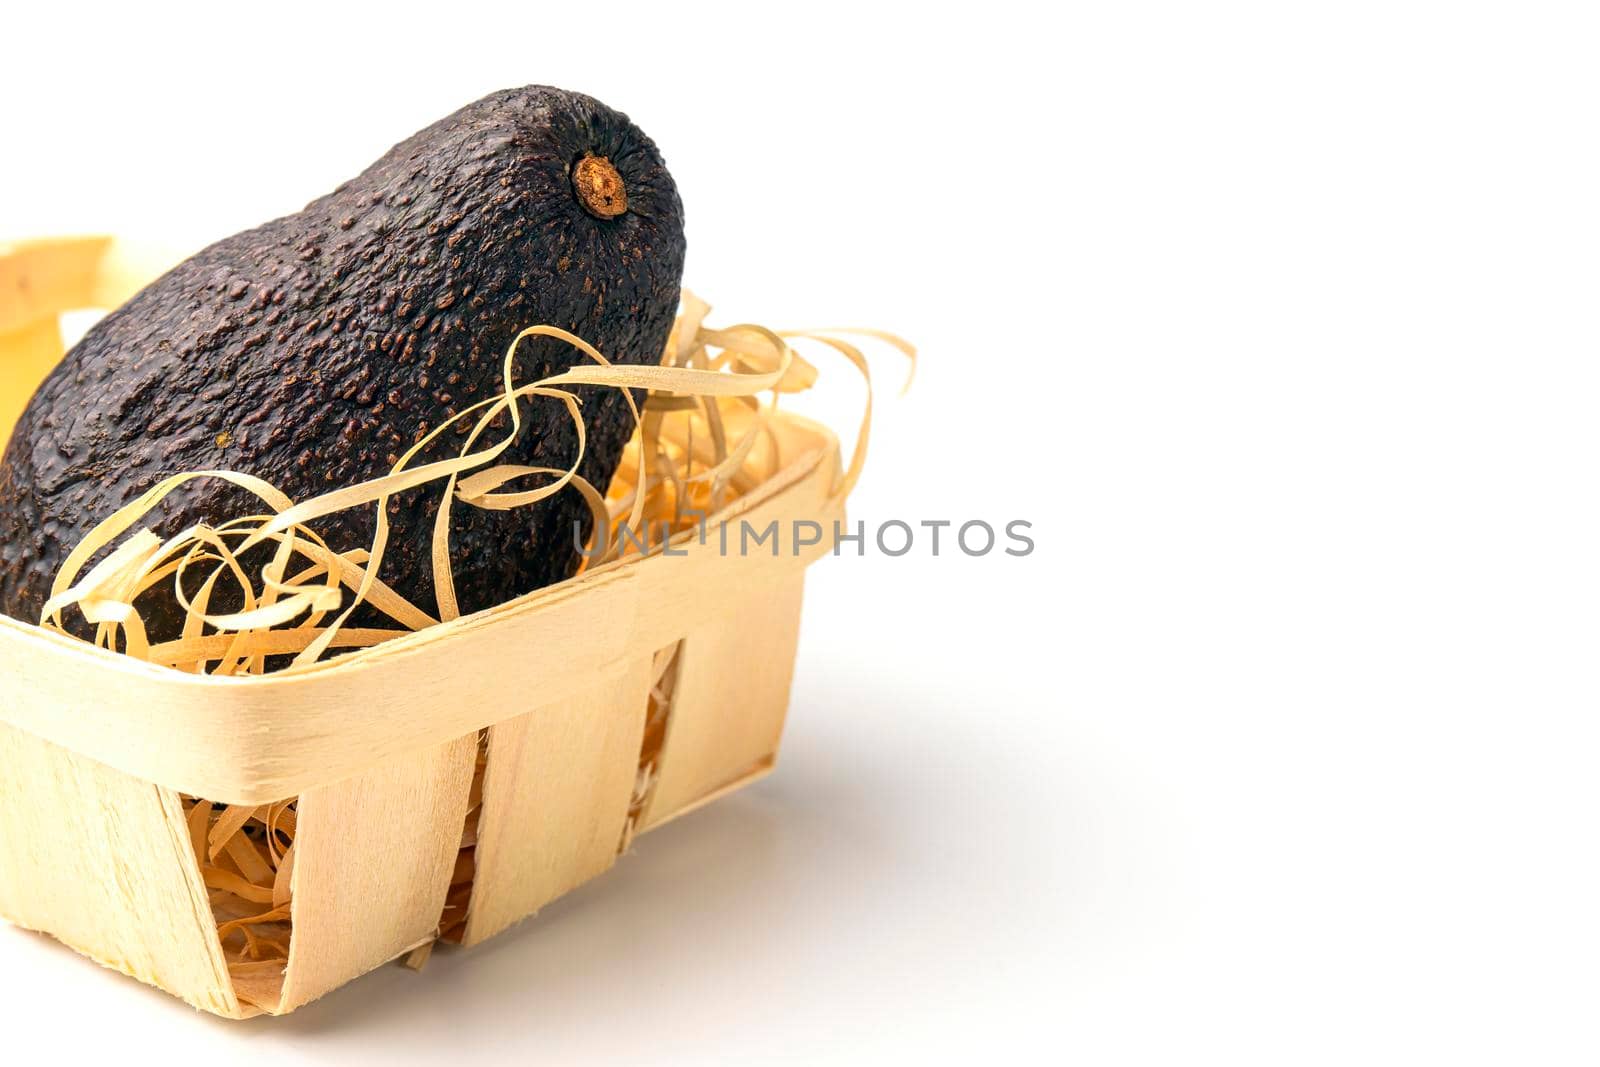 avocado in a basket on a white background close-up. isolate. High quality photo